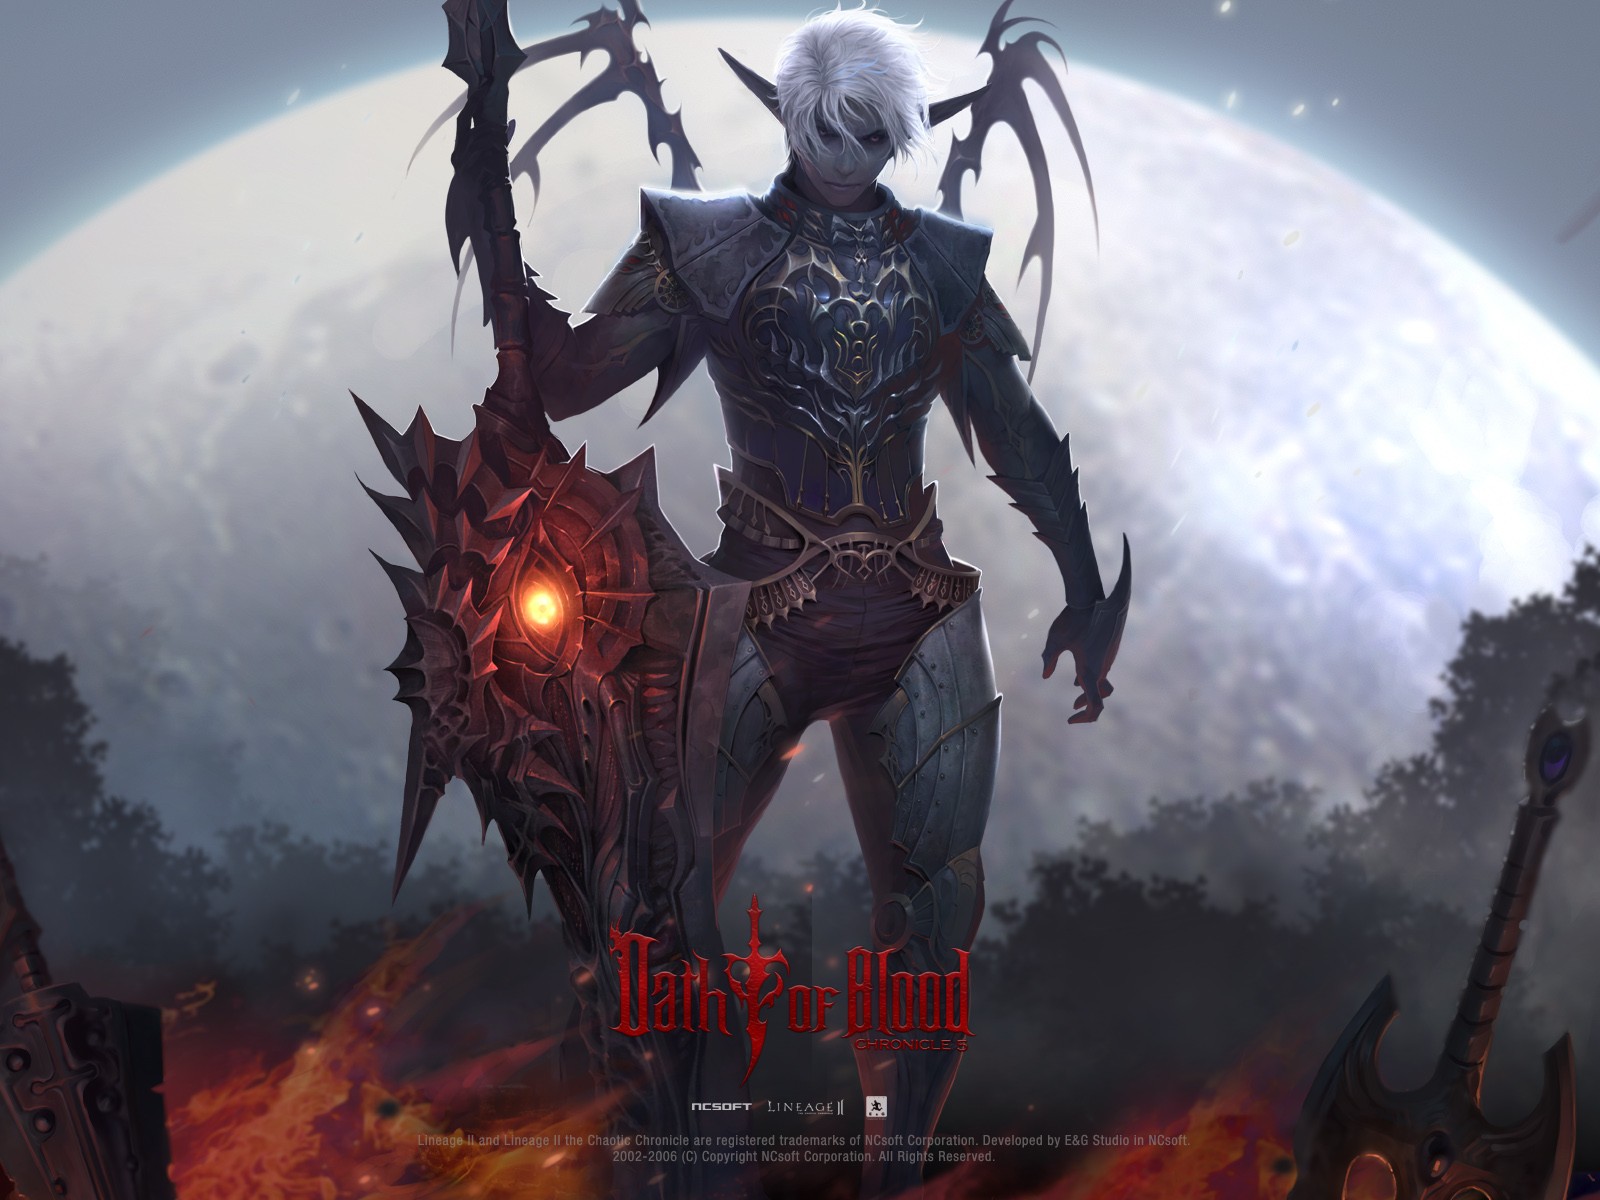 General 1600x1200 Lineage elves weapon Moon fire Lineage II fantasy art video games PC gaming NCSOFT